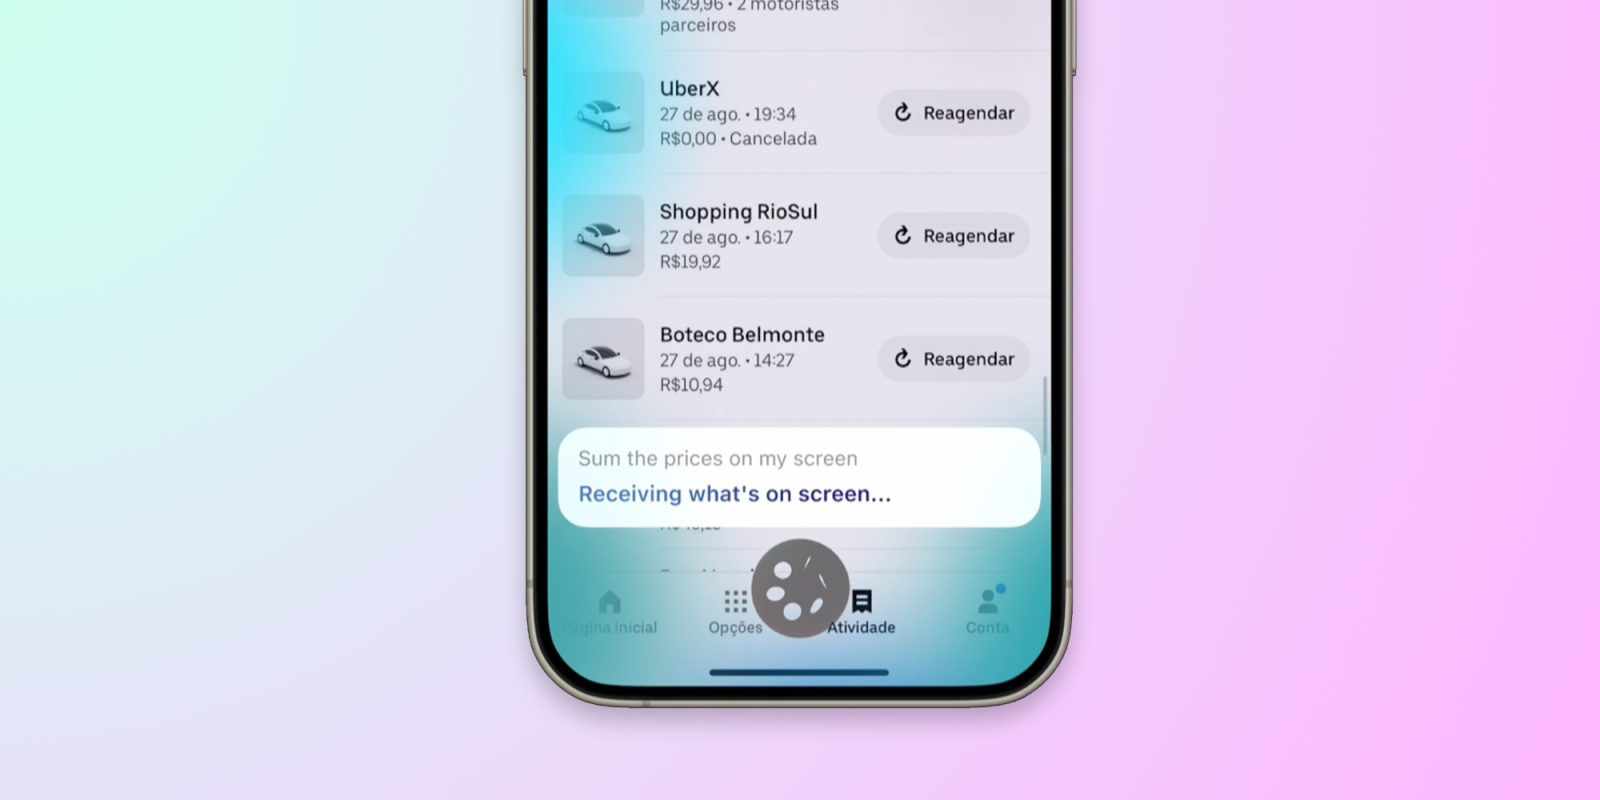 Concept imagines how Siri could use AI to read and interact with what's on the screen